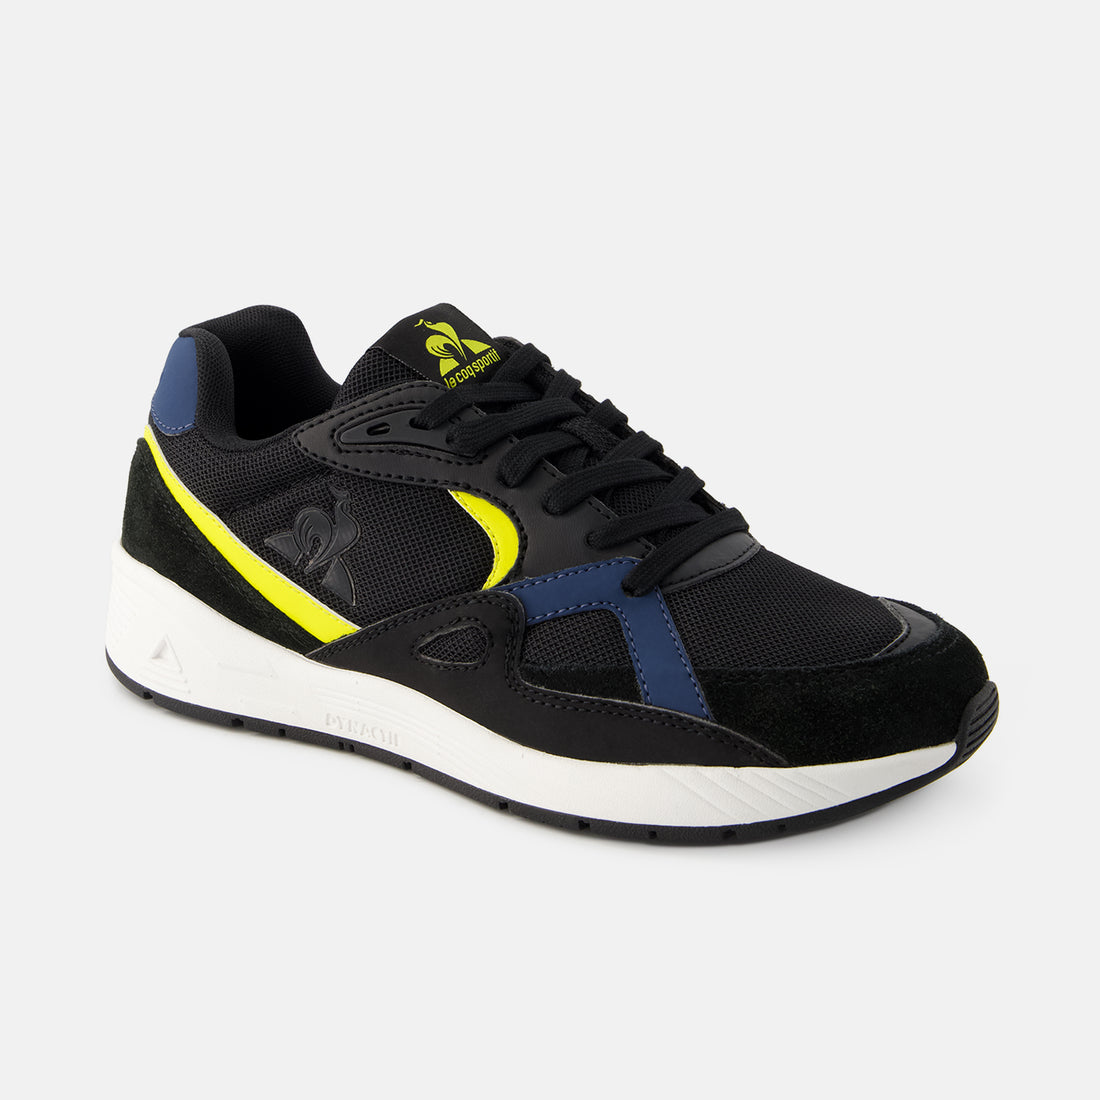 2410510-R850_2 black/ blazing yellow | Chaussures R850_2 Homme